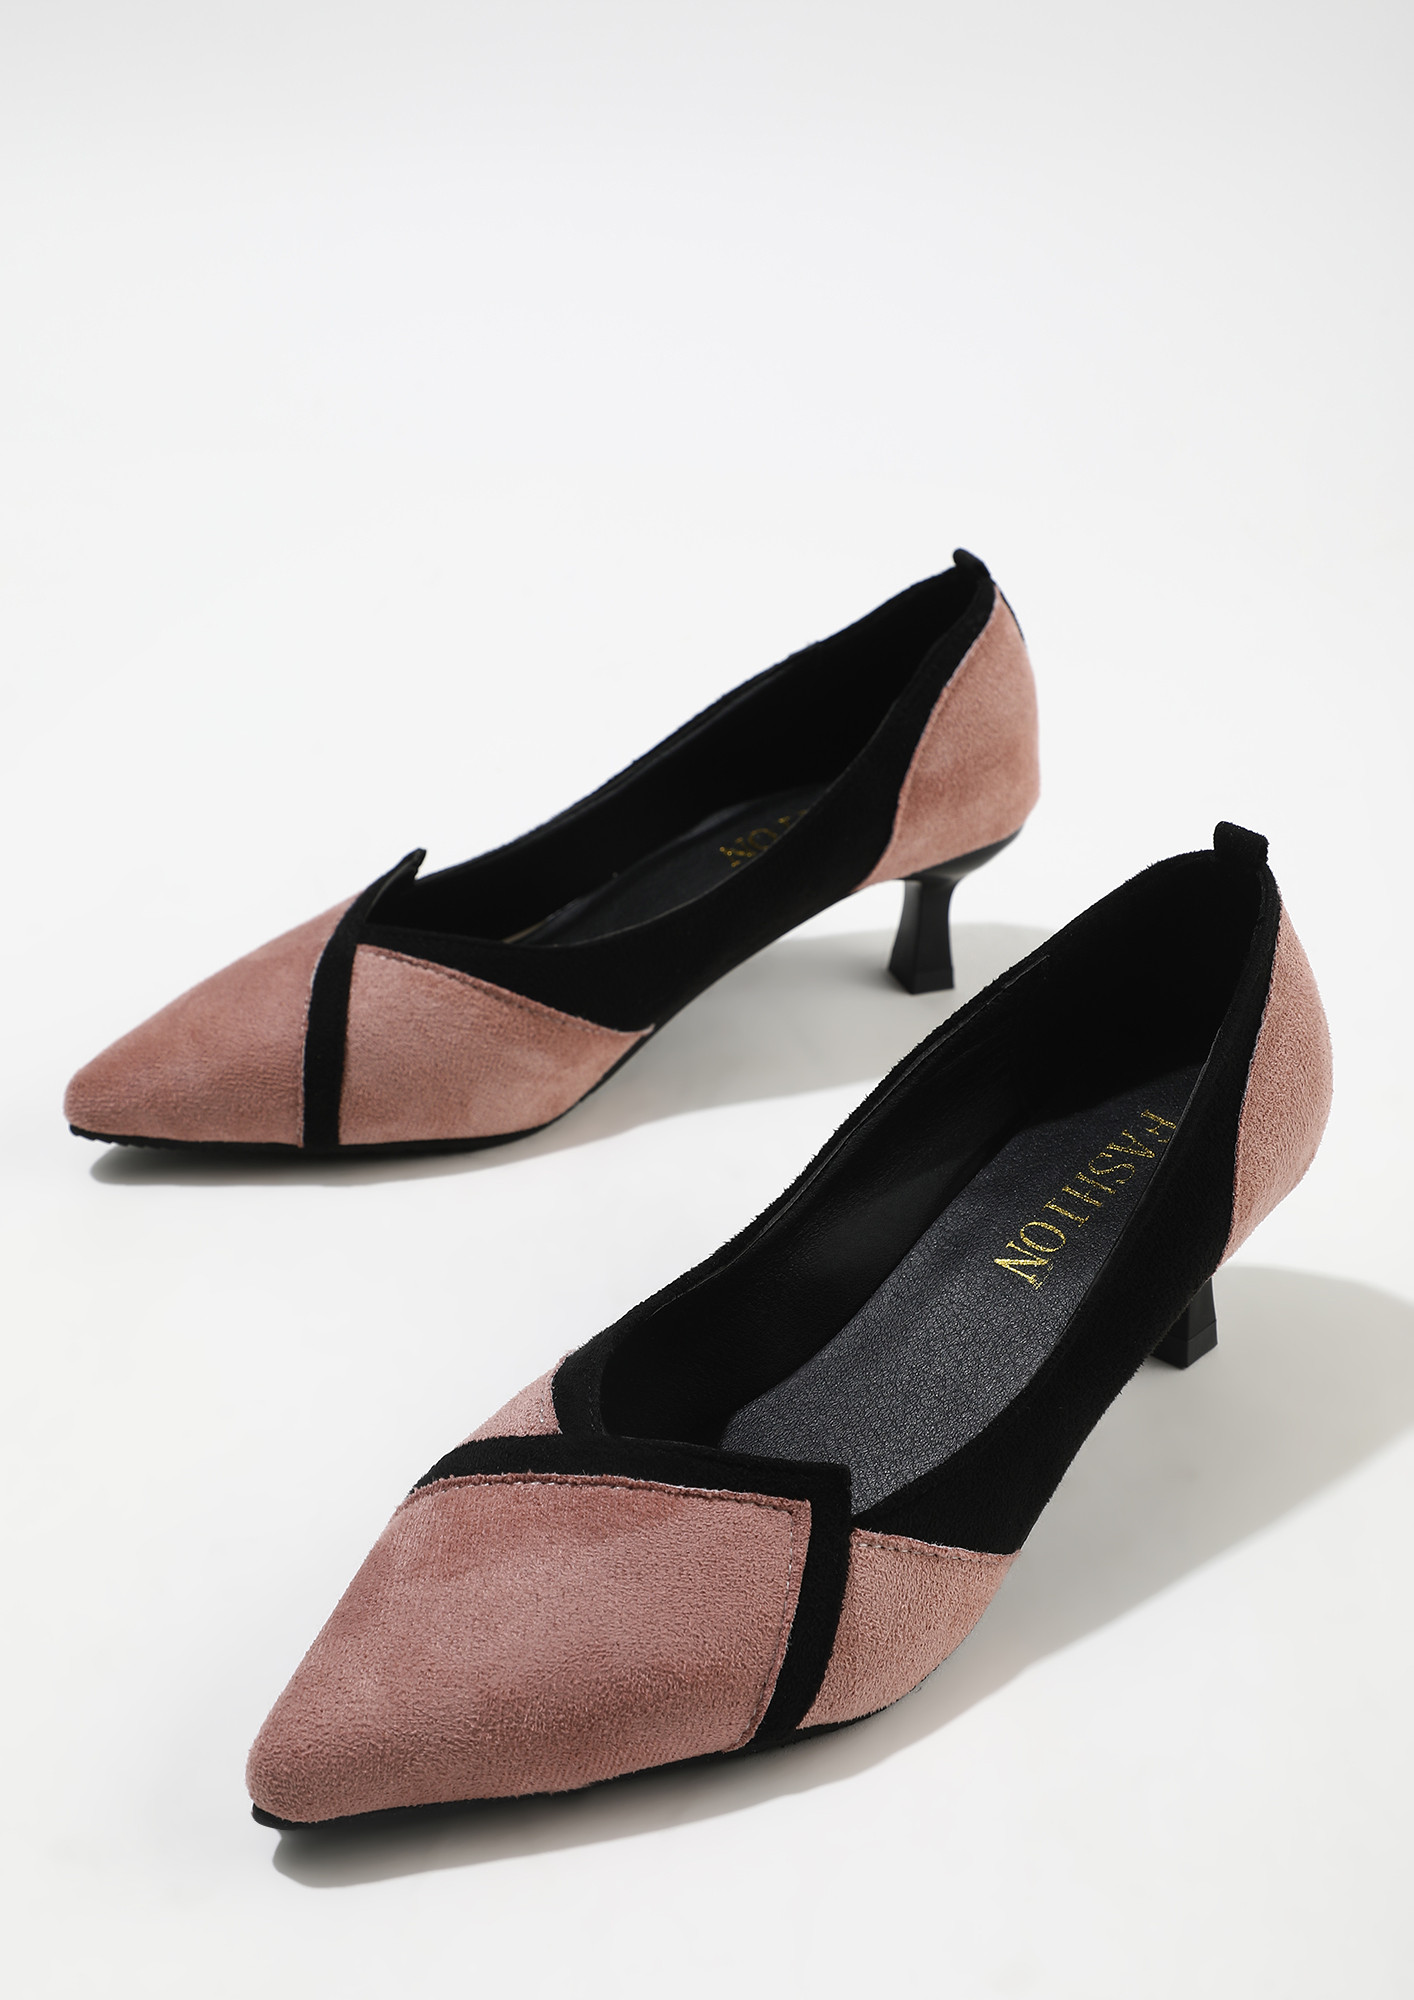 ALL THINGS CHIC PINK HEELED SHOES